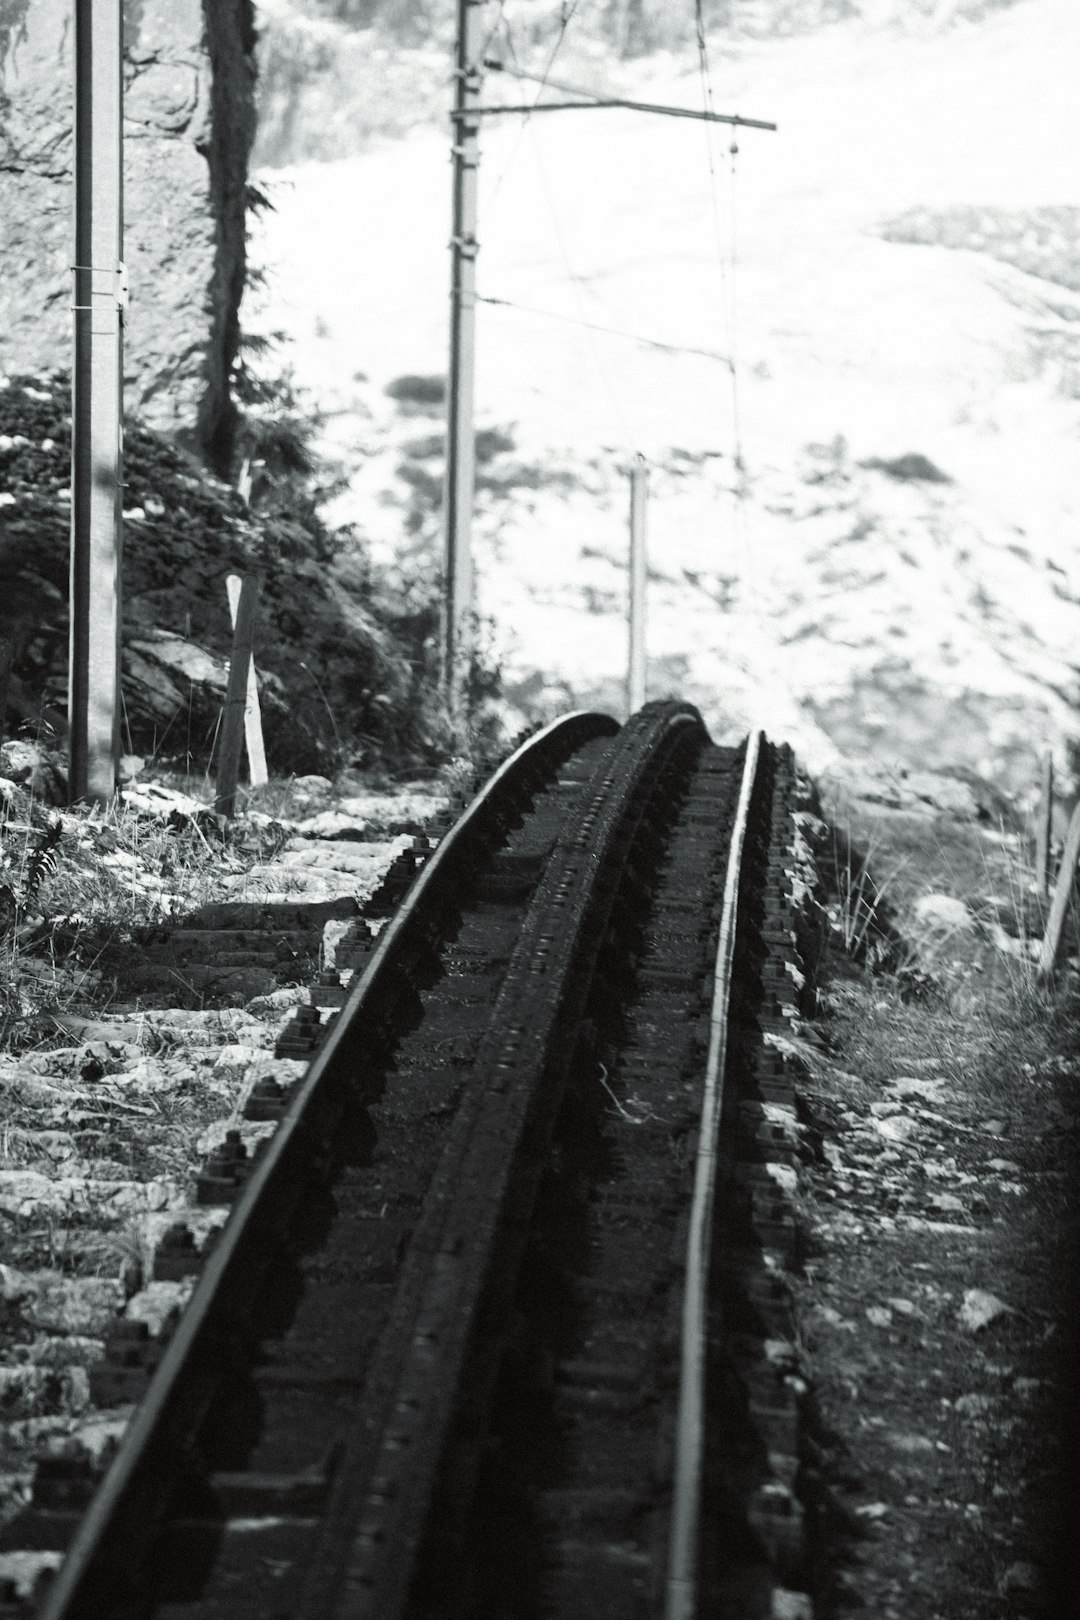 black metal train rail surrounded by trees during daytime